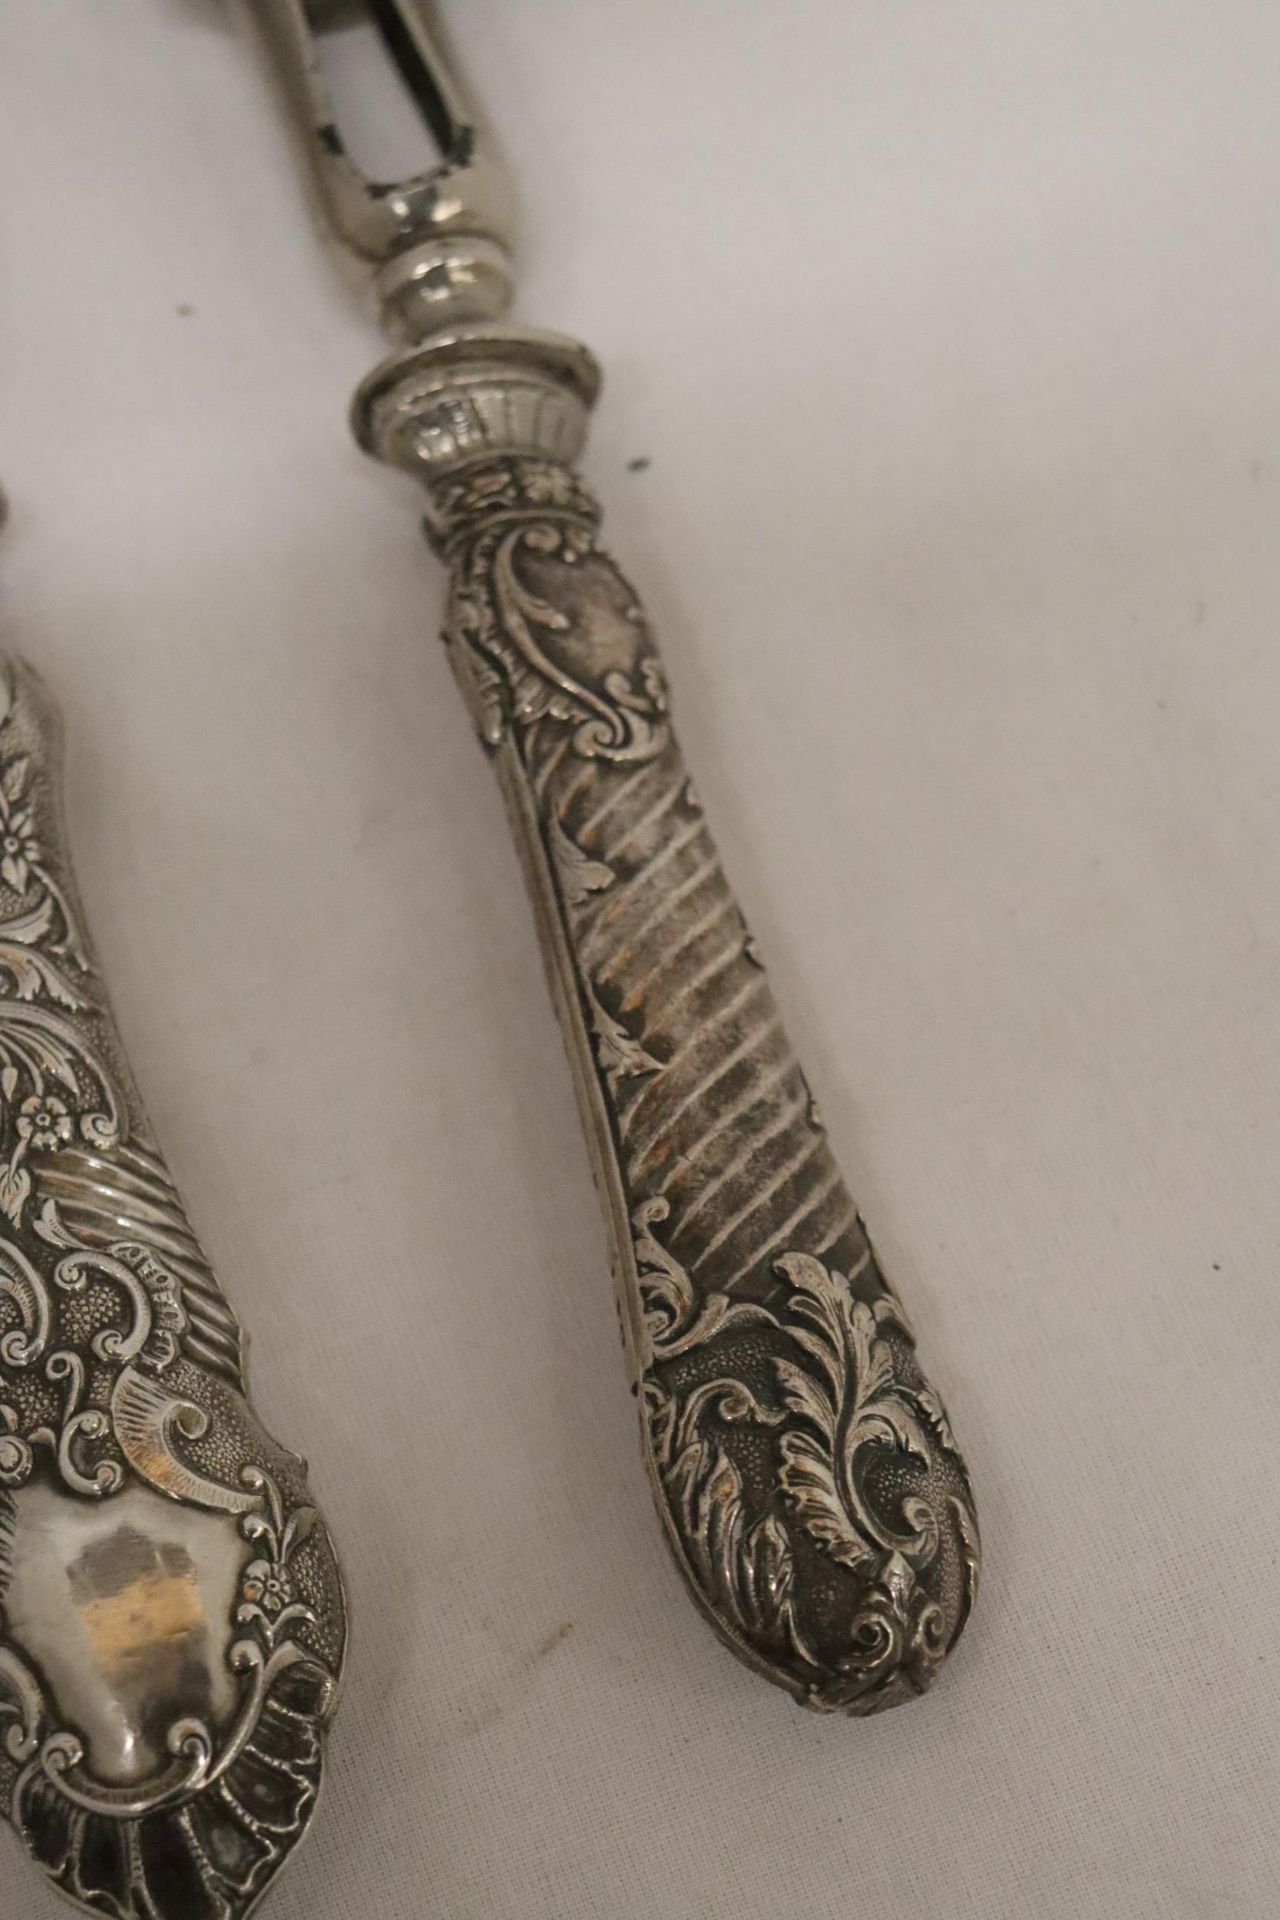 TWO VINTAGE CONTINENTAL, POSSIBLY SILVER, HANDLED GIGOT LAMB SHANK/HAM BONE HOLDERS - Image 3 of 6